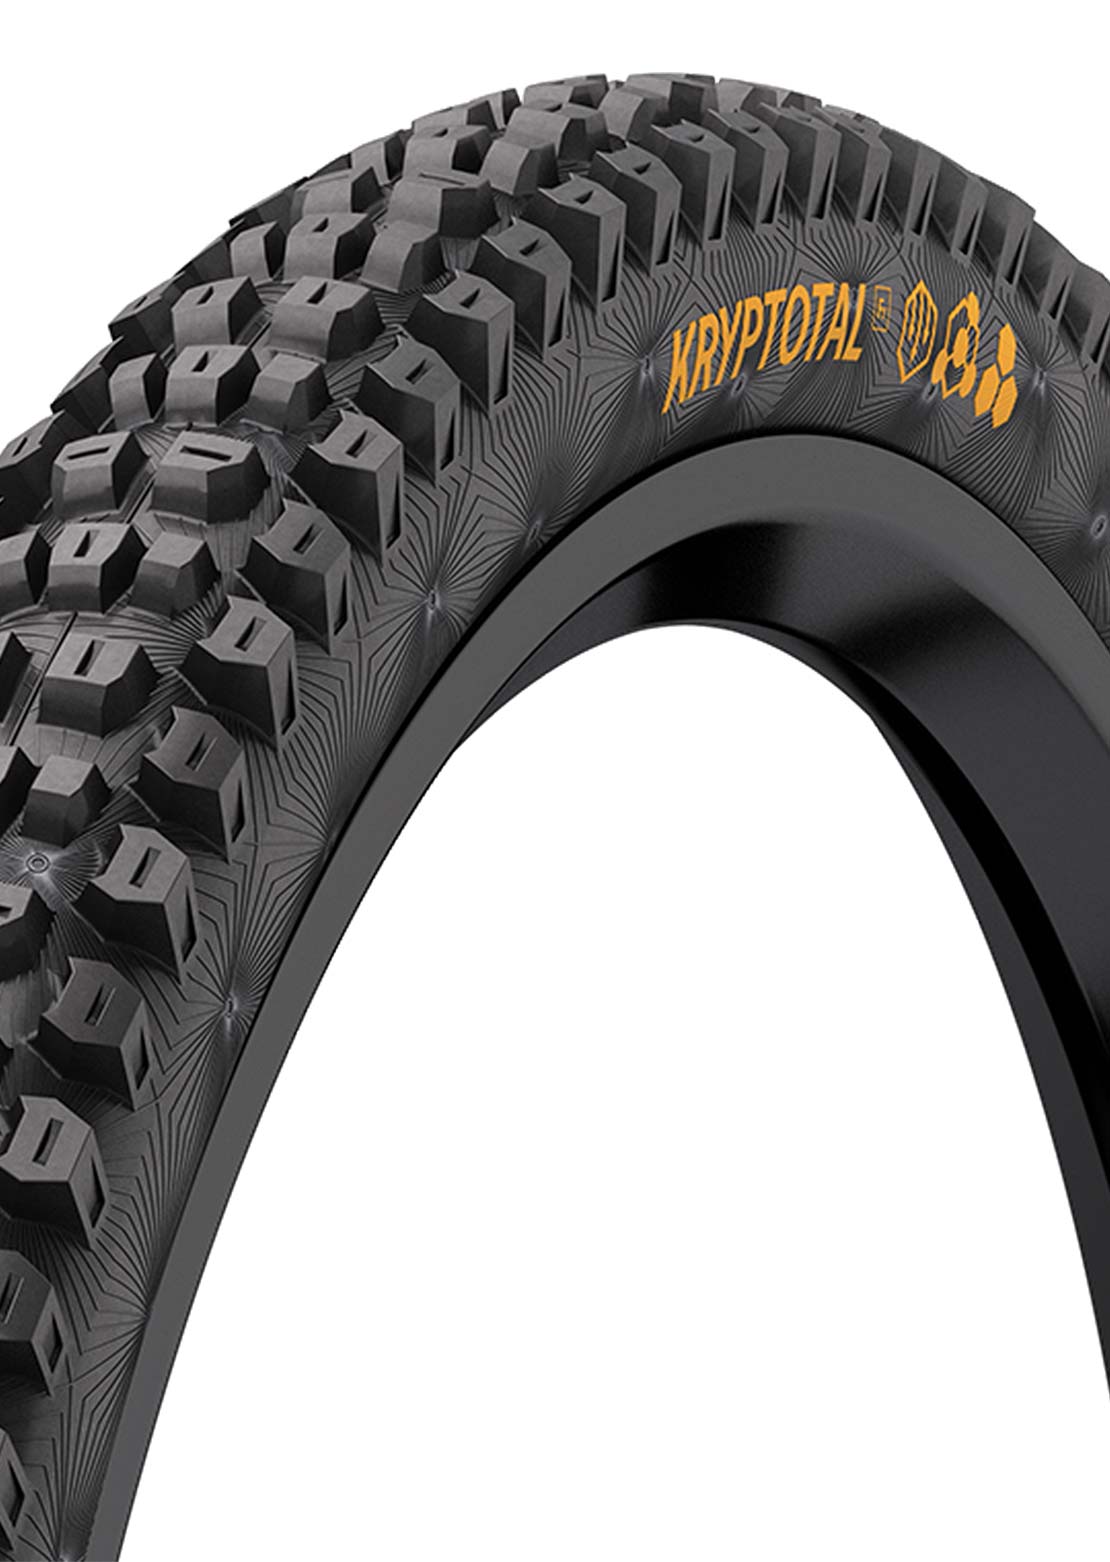 Continental Kryptotal-R DH Casing SuperSoft Folding Moutnain Bike Tires - 29&quot; x 2.4&quot;